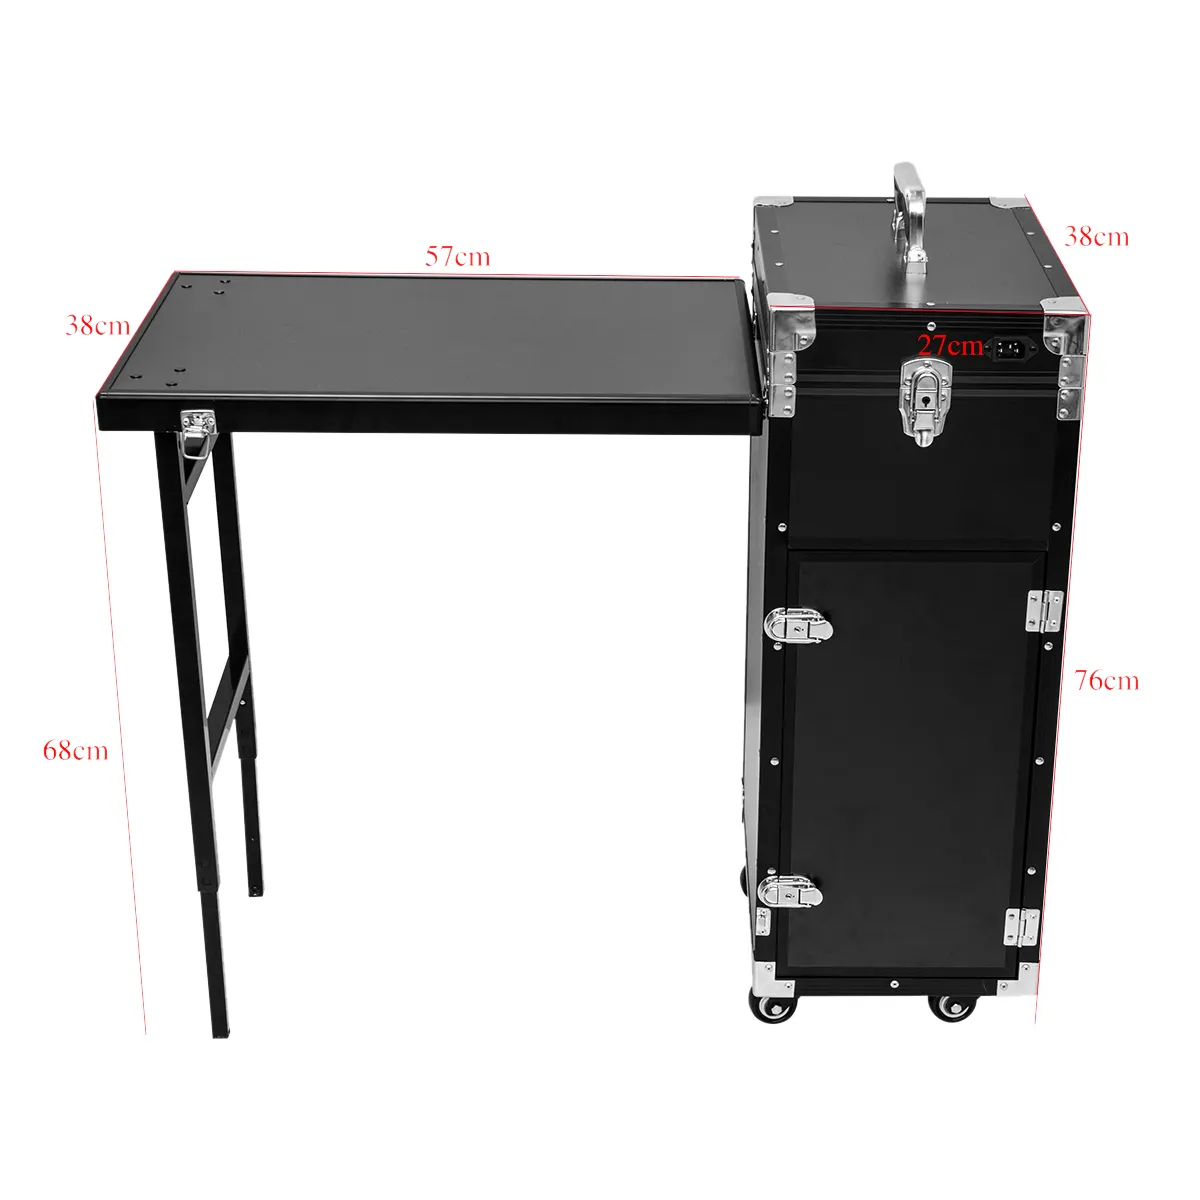 FAMA factory Multi-function Rolling Studio Makeup Case Manicure Train Table With Side Leg Mirror Train Table